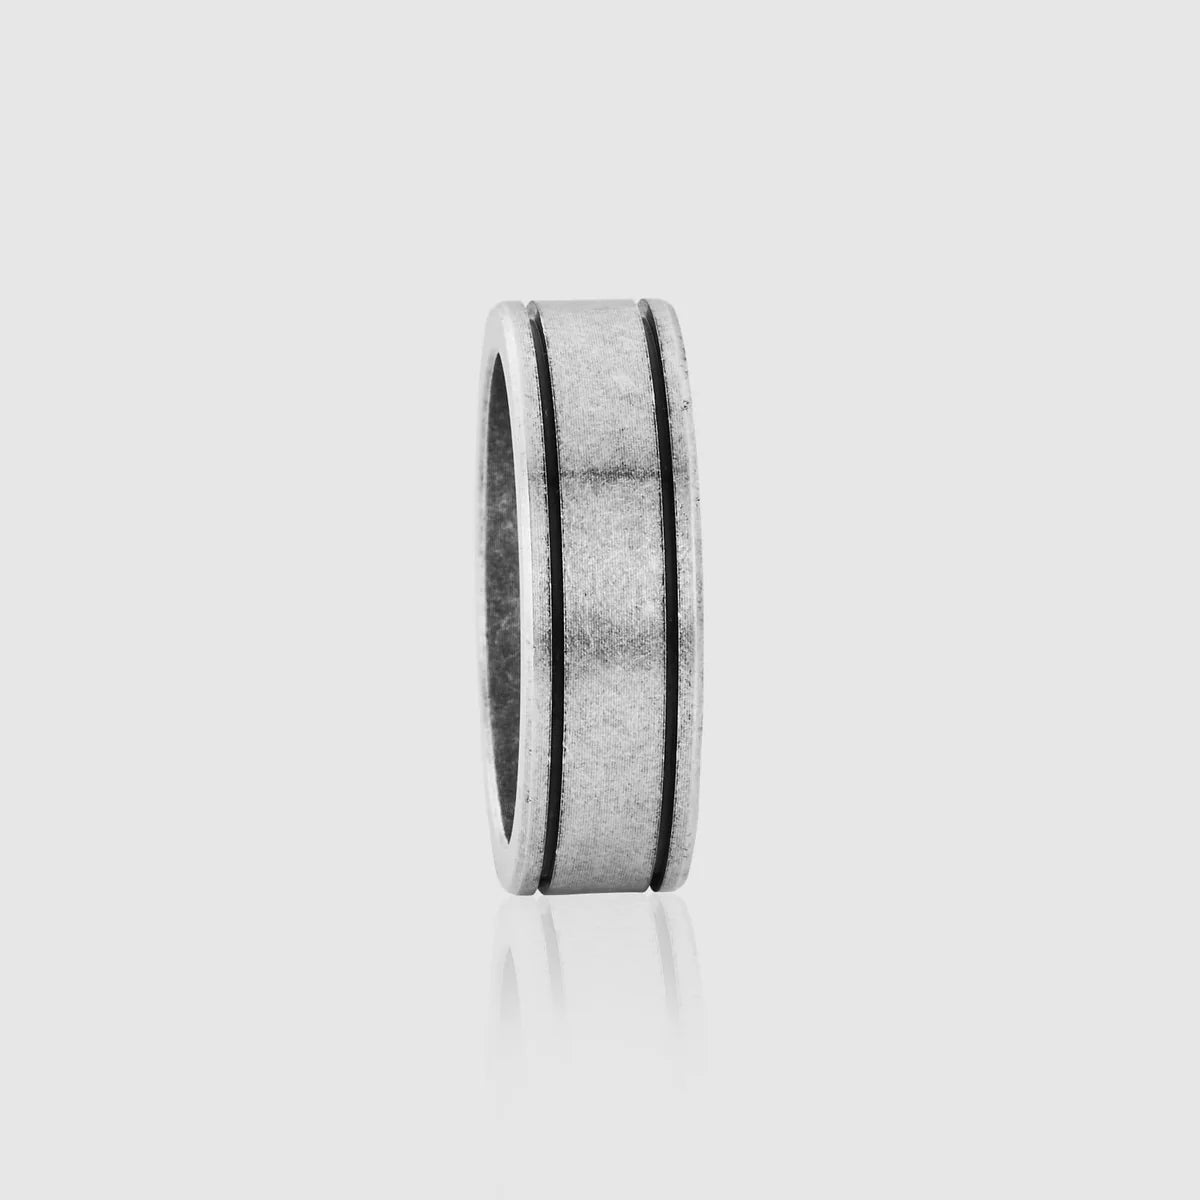 Oxidized Lines Ring